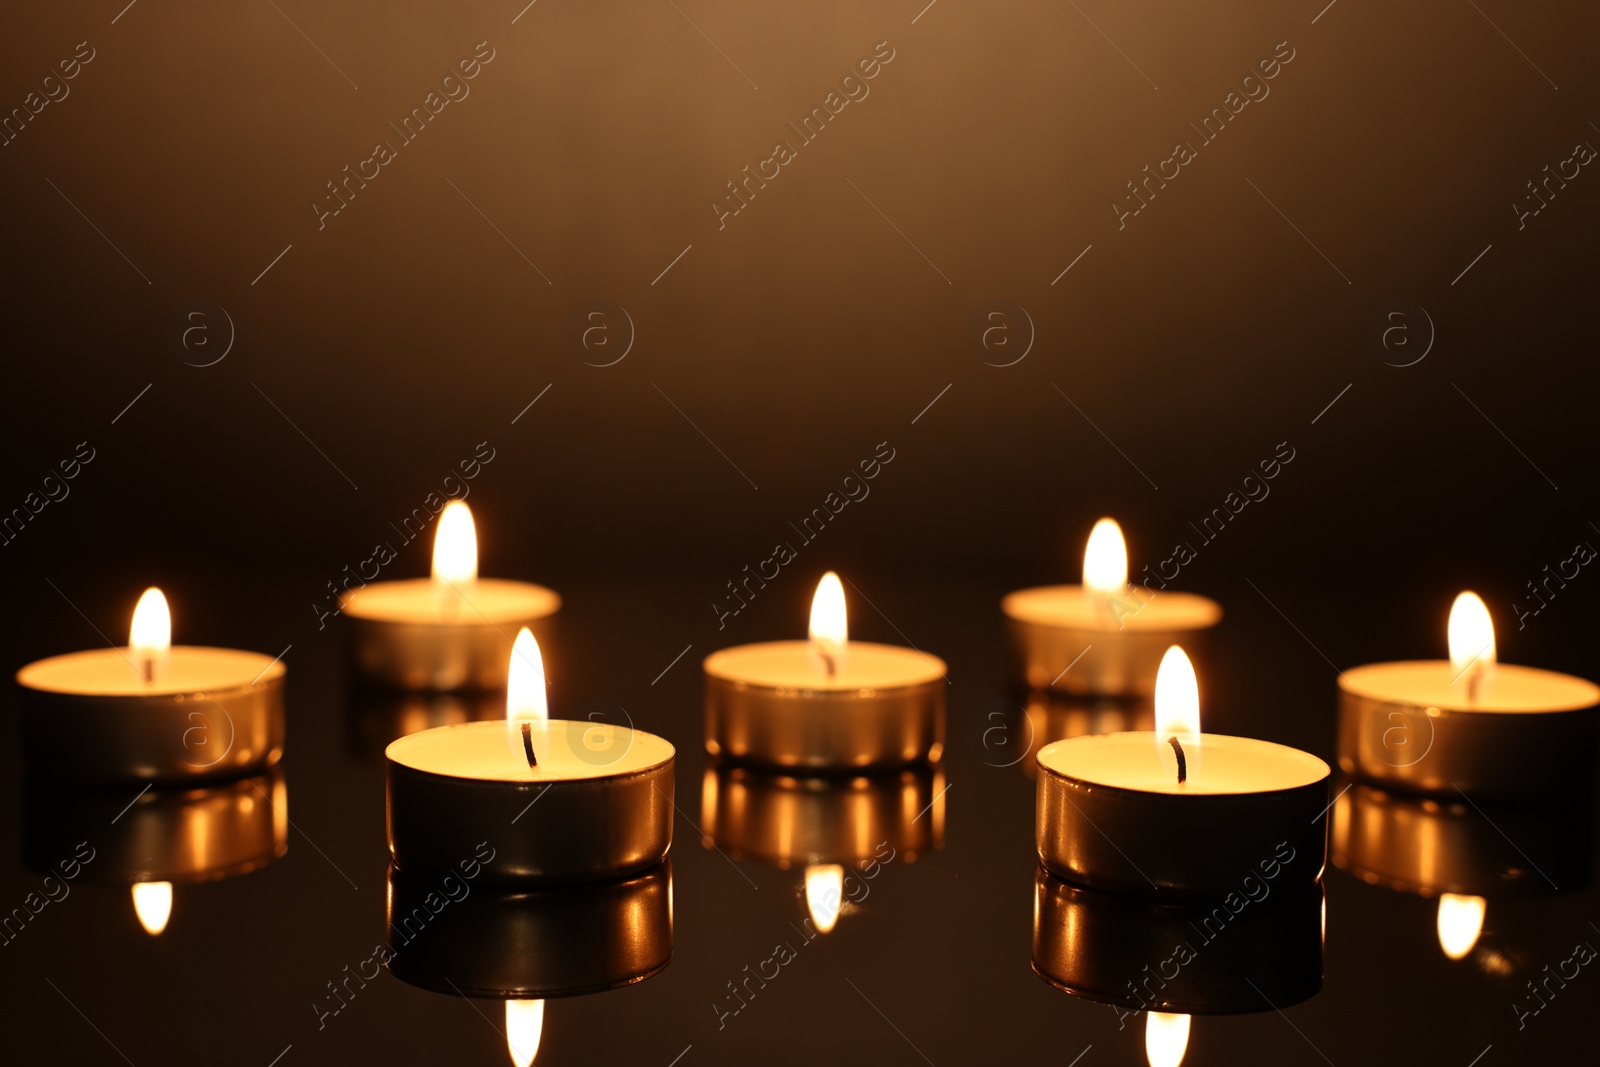 Photo of Burning candles on mirror surface in darkness, closeup